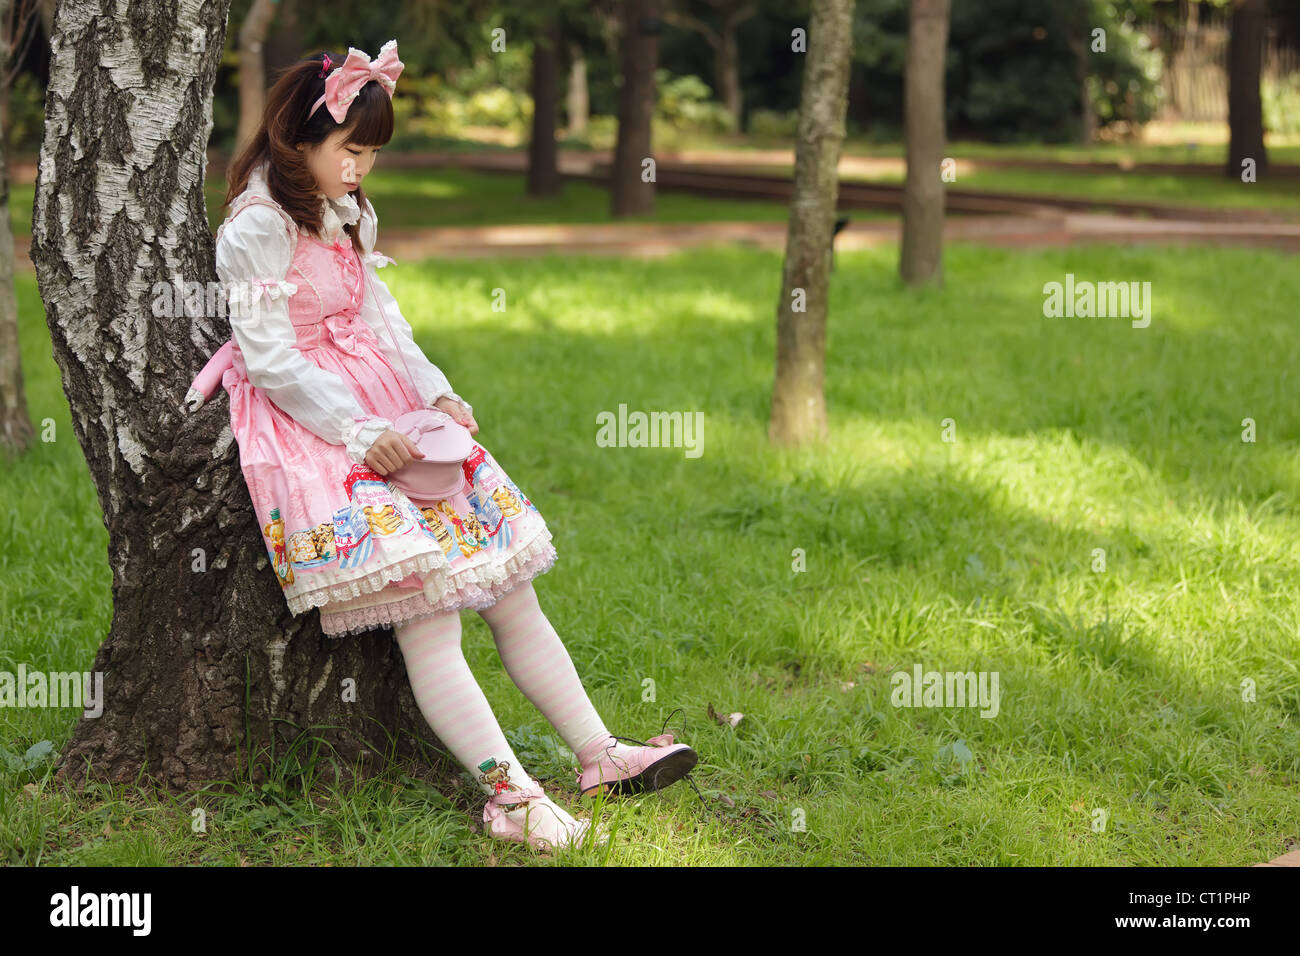 Sweet Lolita High Resolution Stock Photography and Images - Alamy